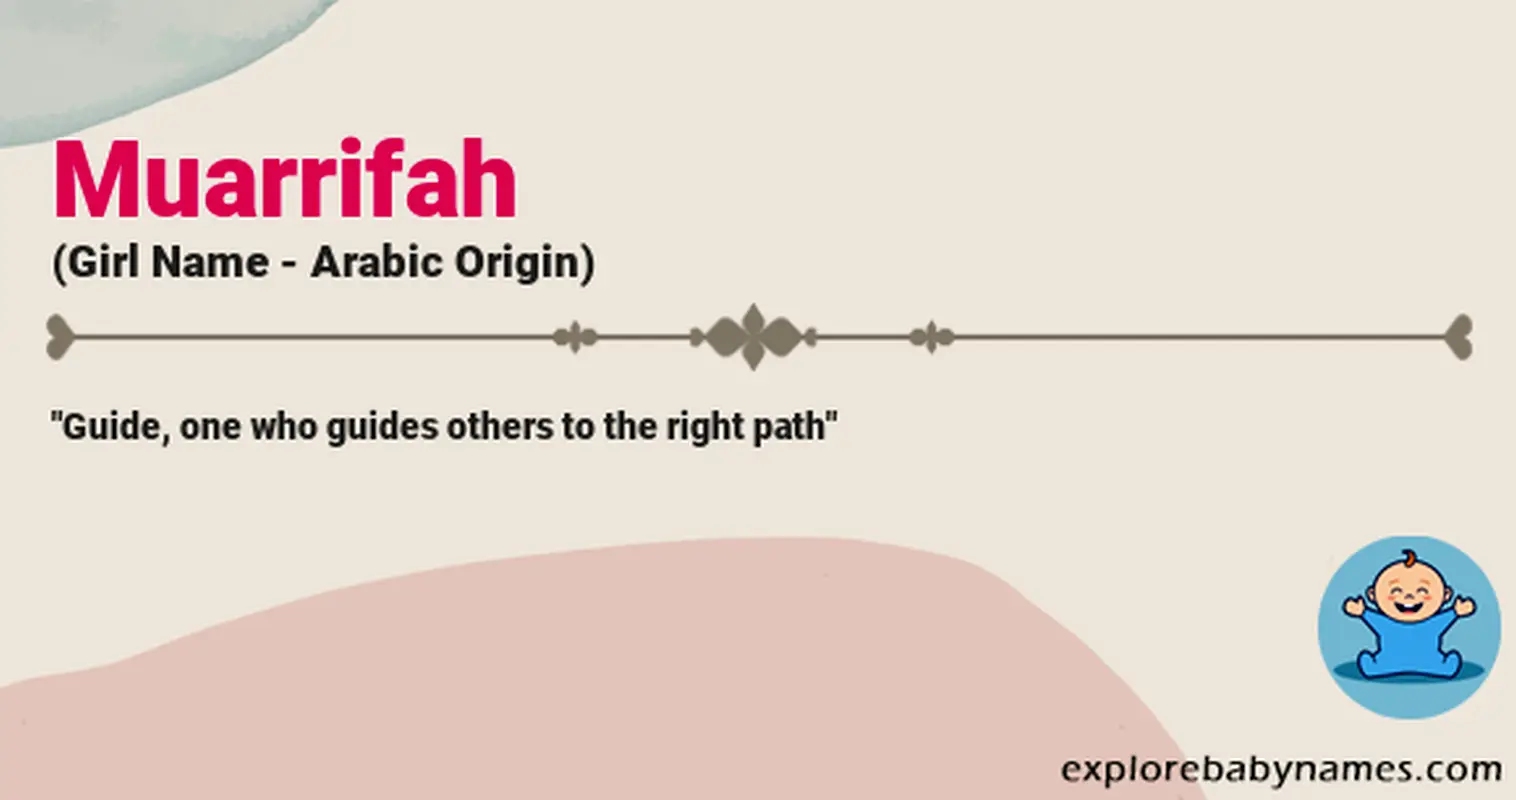 Meaning of Muarrifah